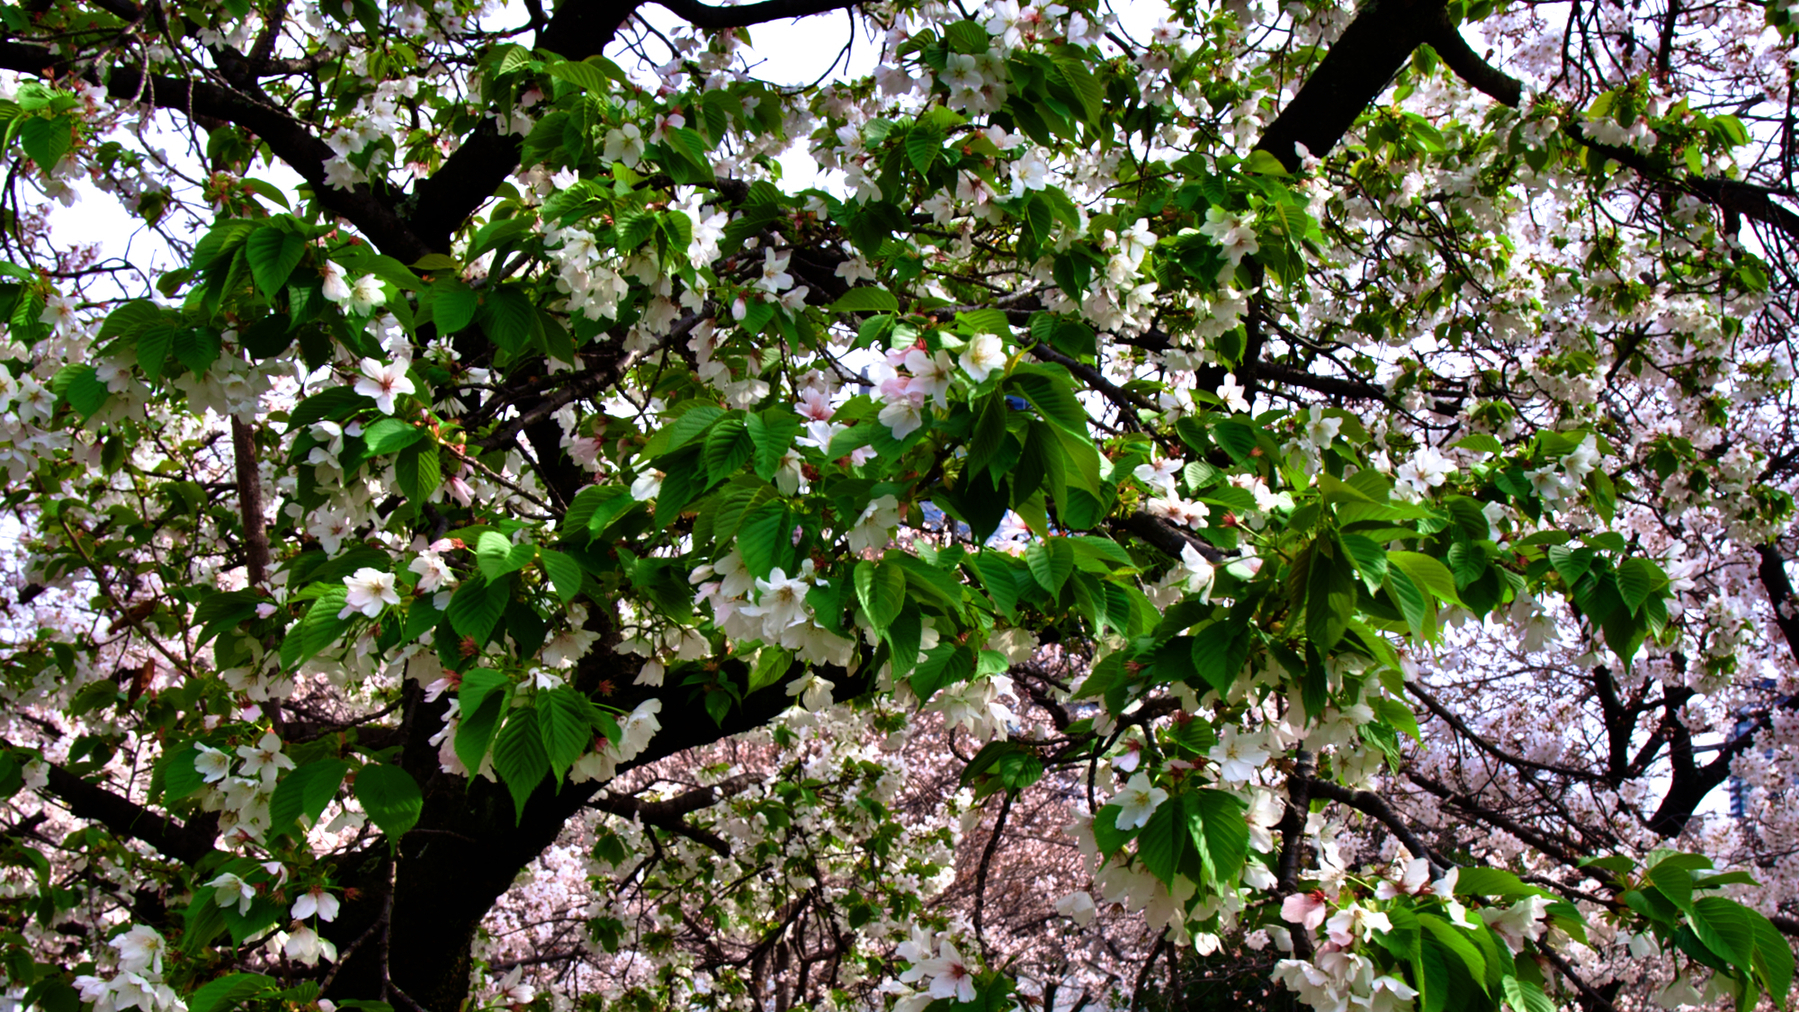 Tight shot of a cherry blossom tree showing the mix of pink blossoms and fresh green leaves. Looks like the leaves are winning